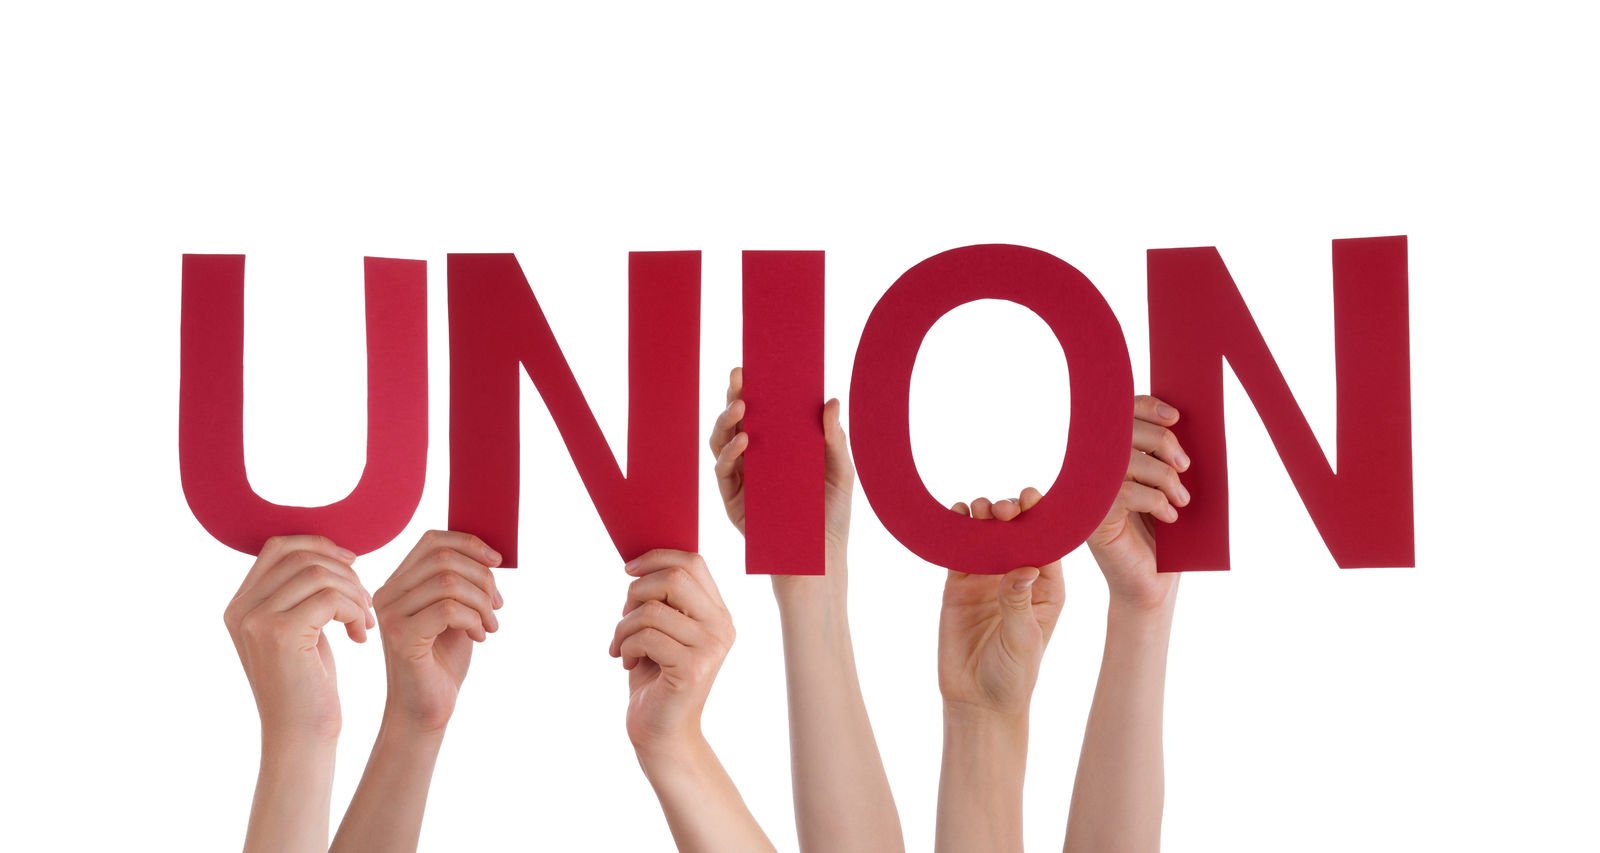 Car Insurance for Union Members